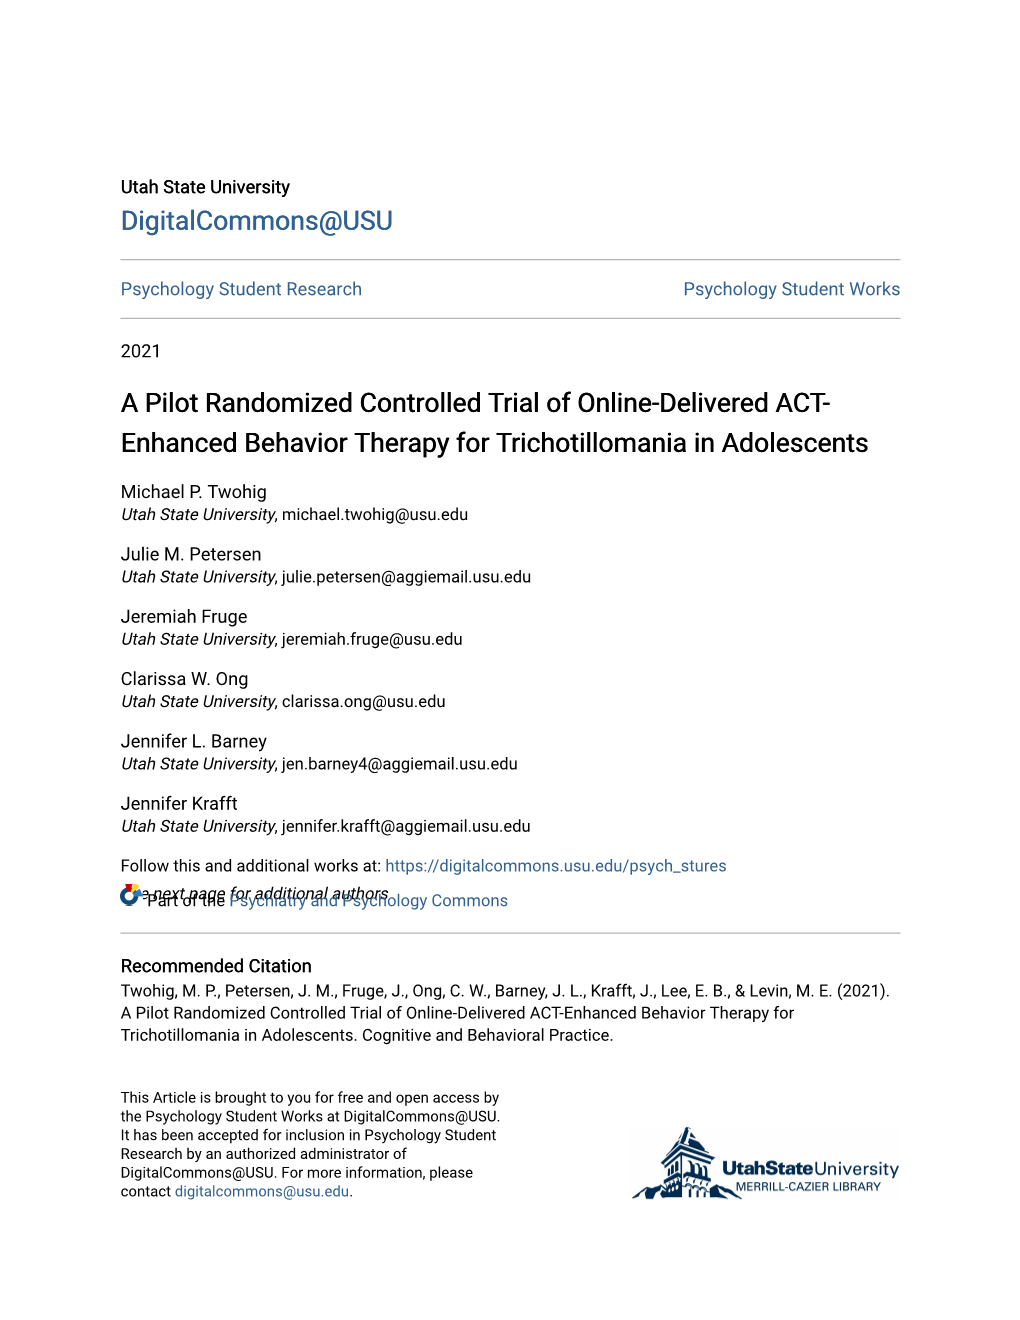 A Pilot Randomized Controlled Trial of Online-Delivered ACT-Enhanced Behavior Therapy for Trichotillomania in Adolescents